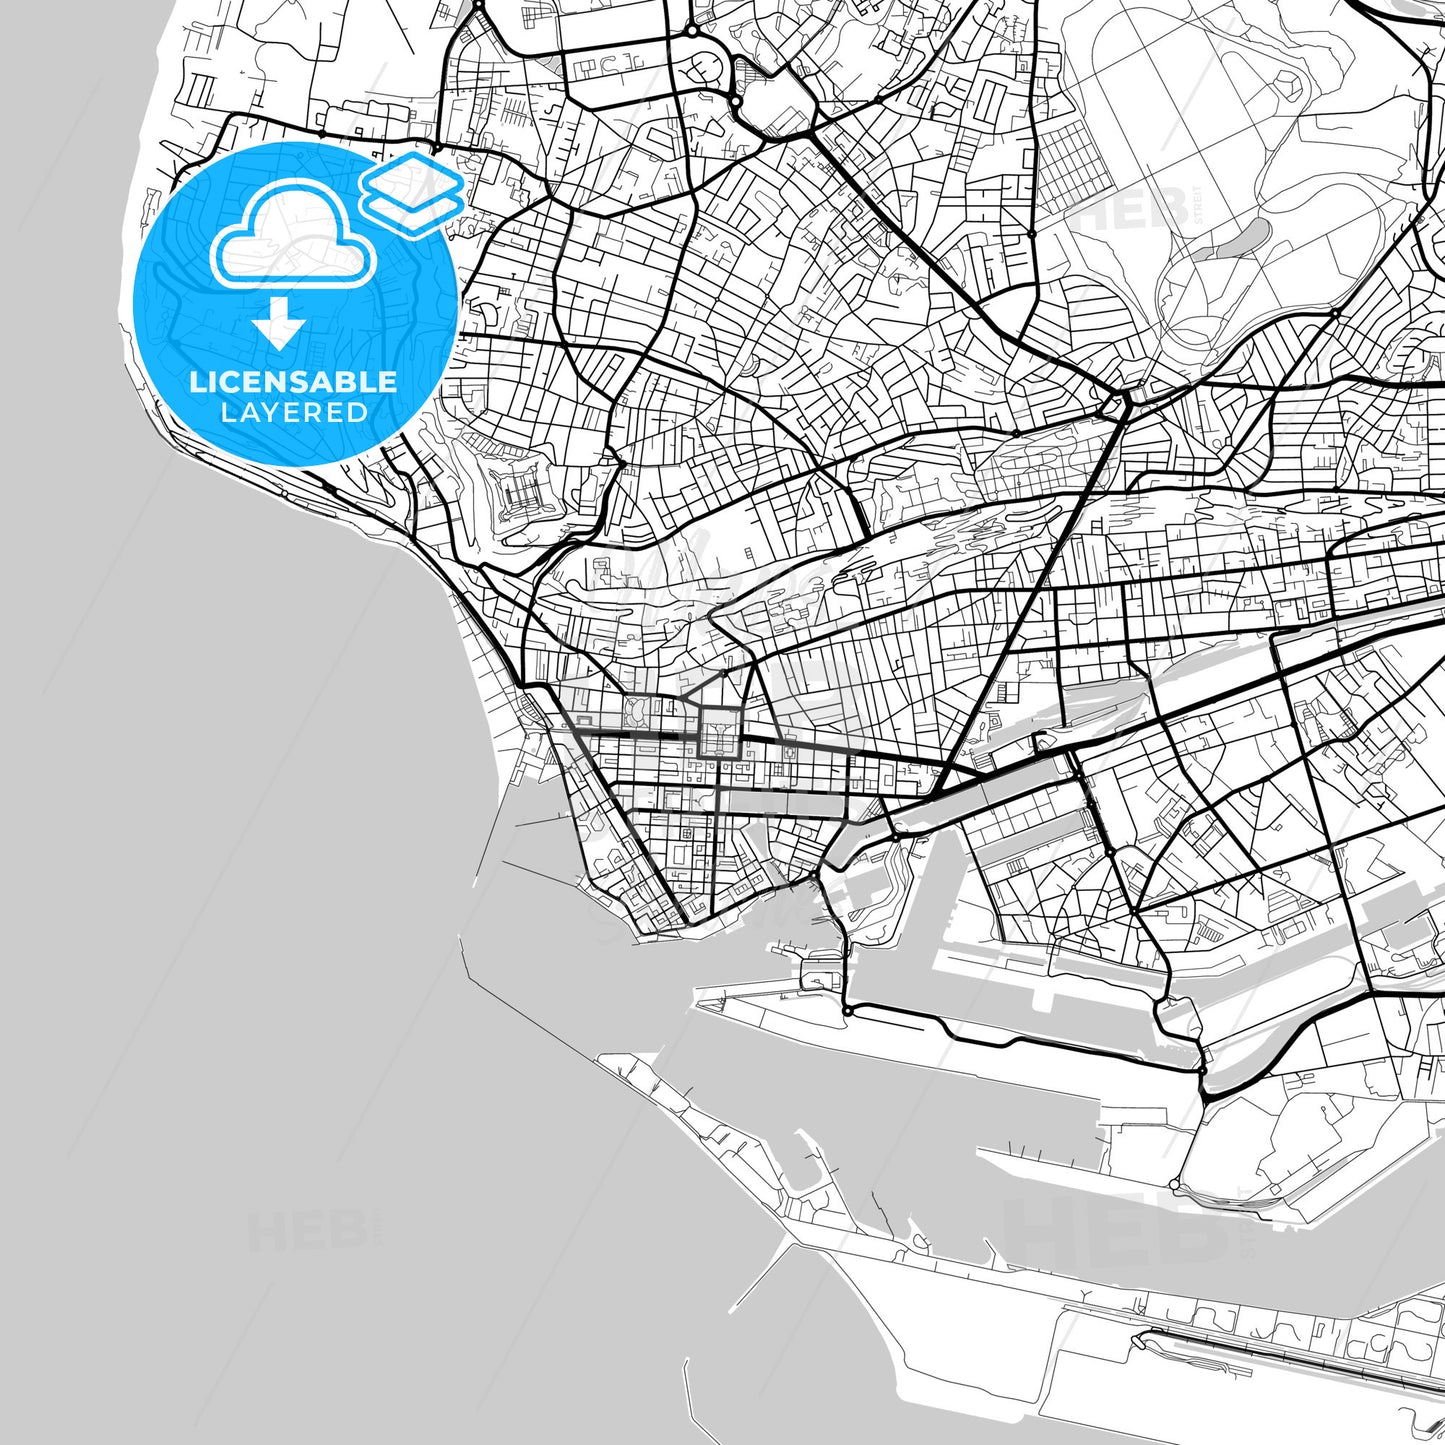 Layered PDF map of Le Havre, Seine-Maritime, France